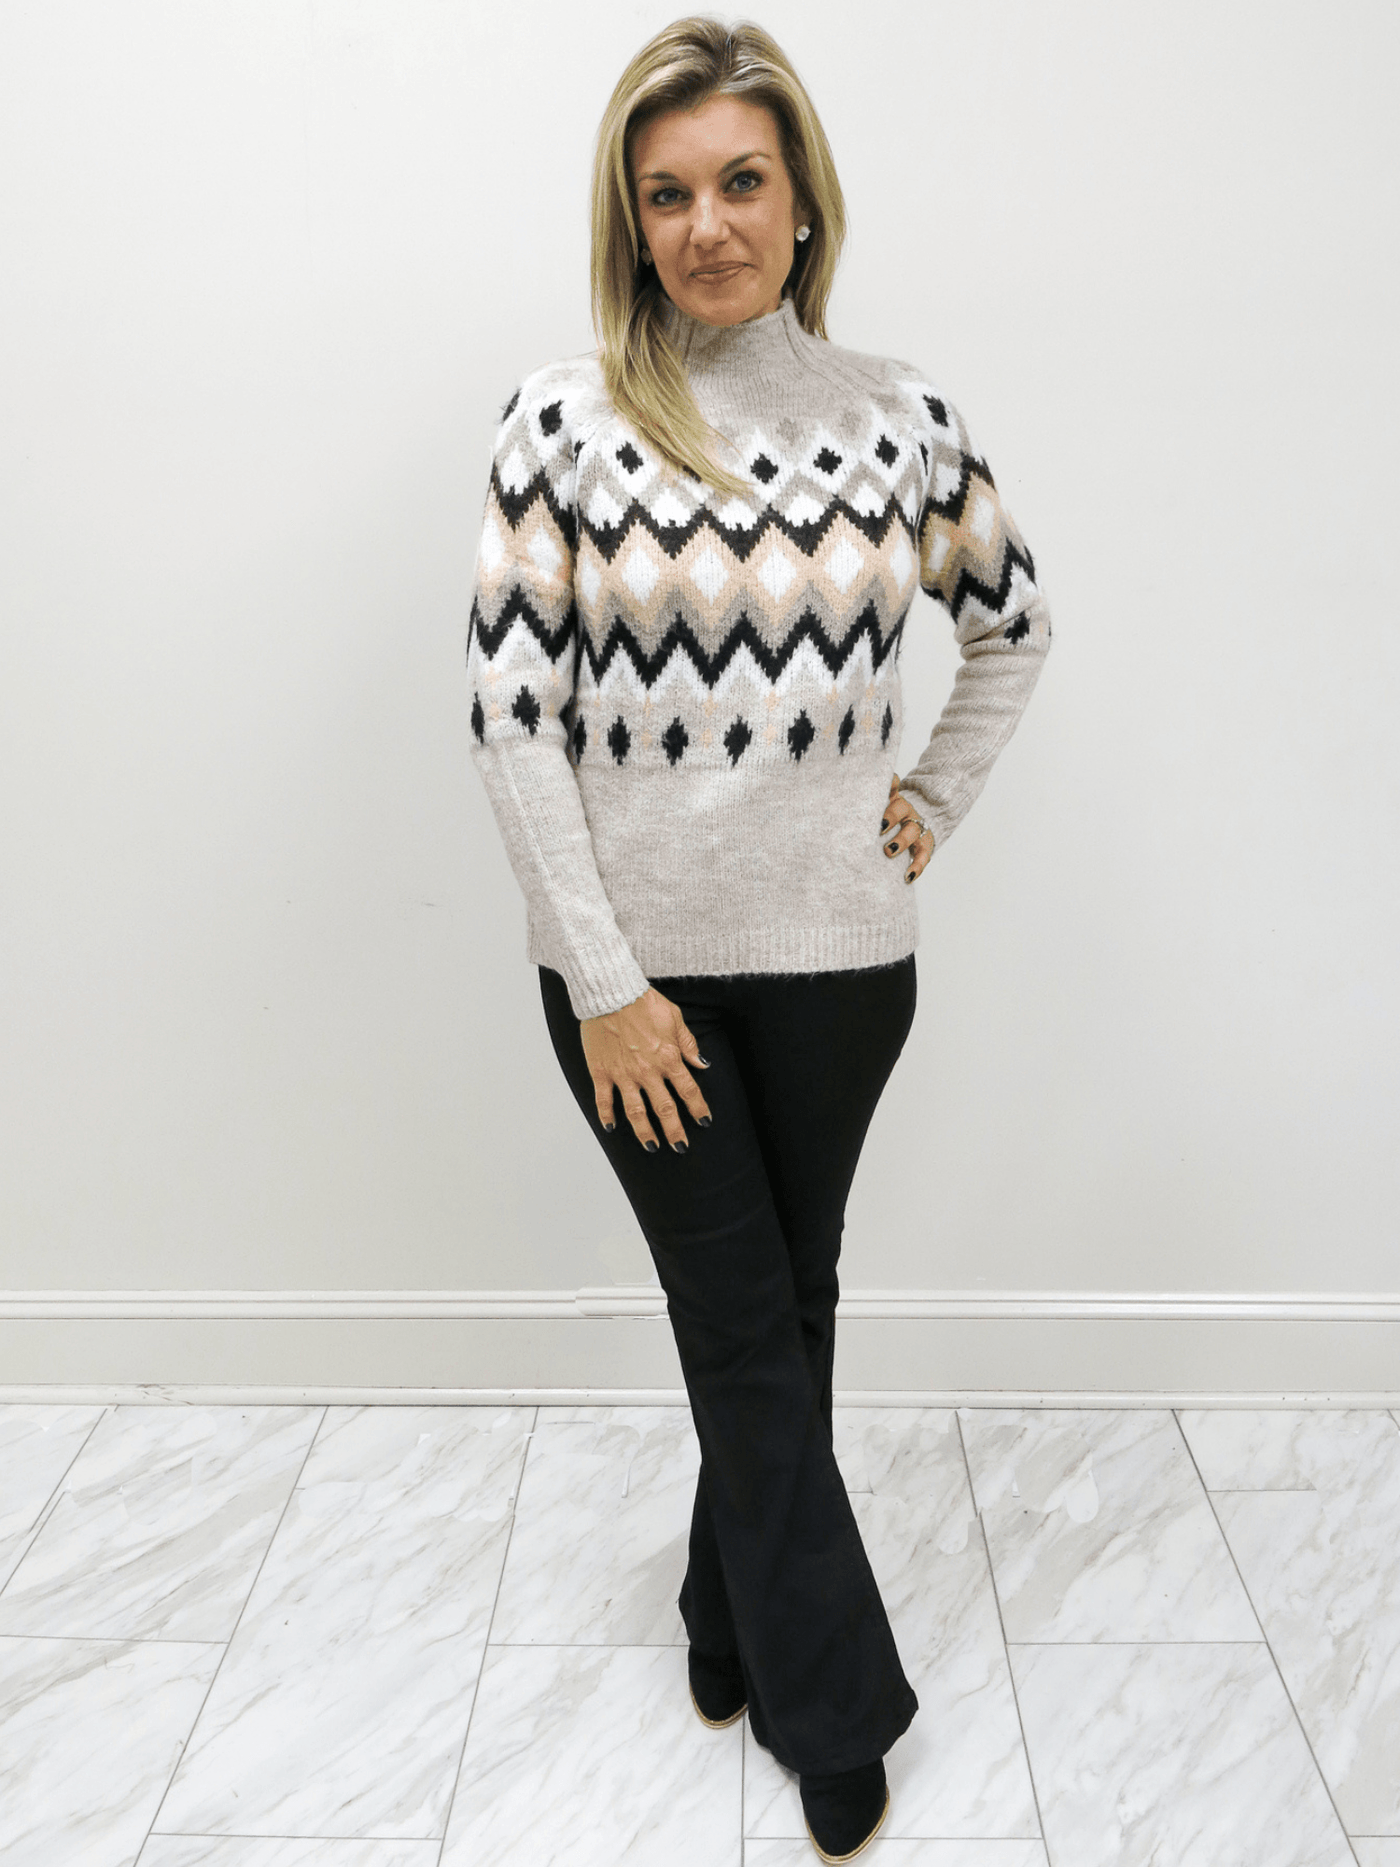 Risen coated black flare jeans with fair isle sweater full front view.